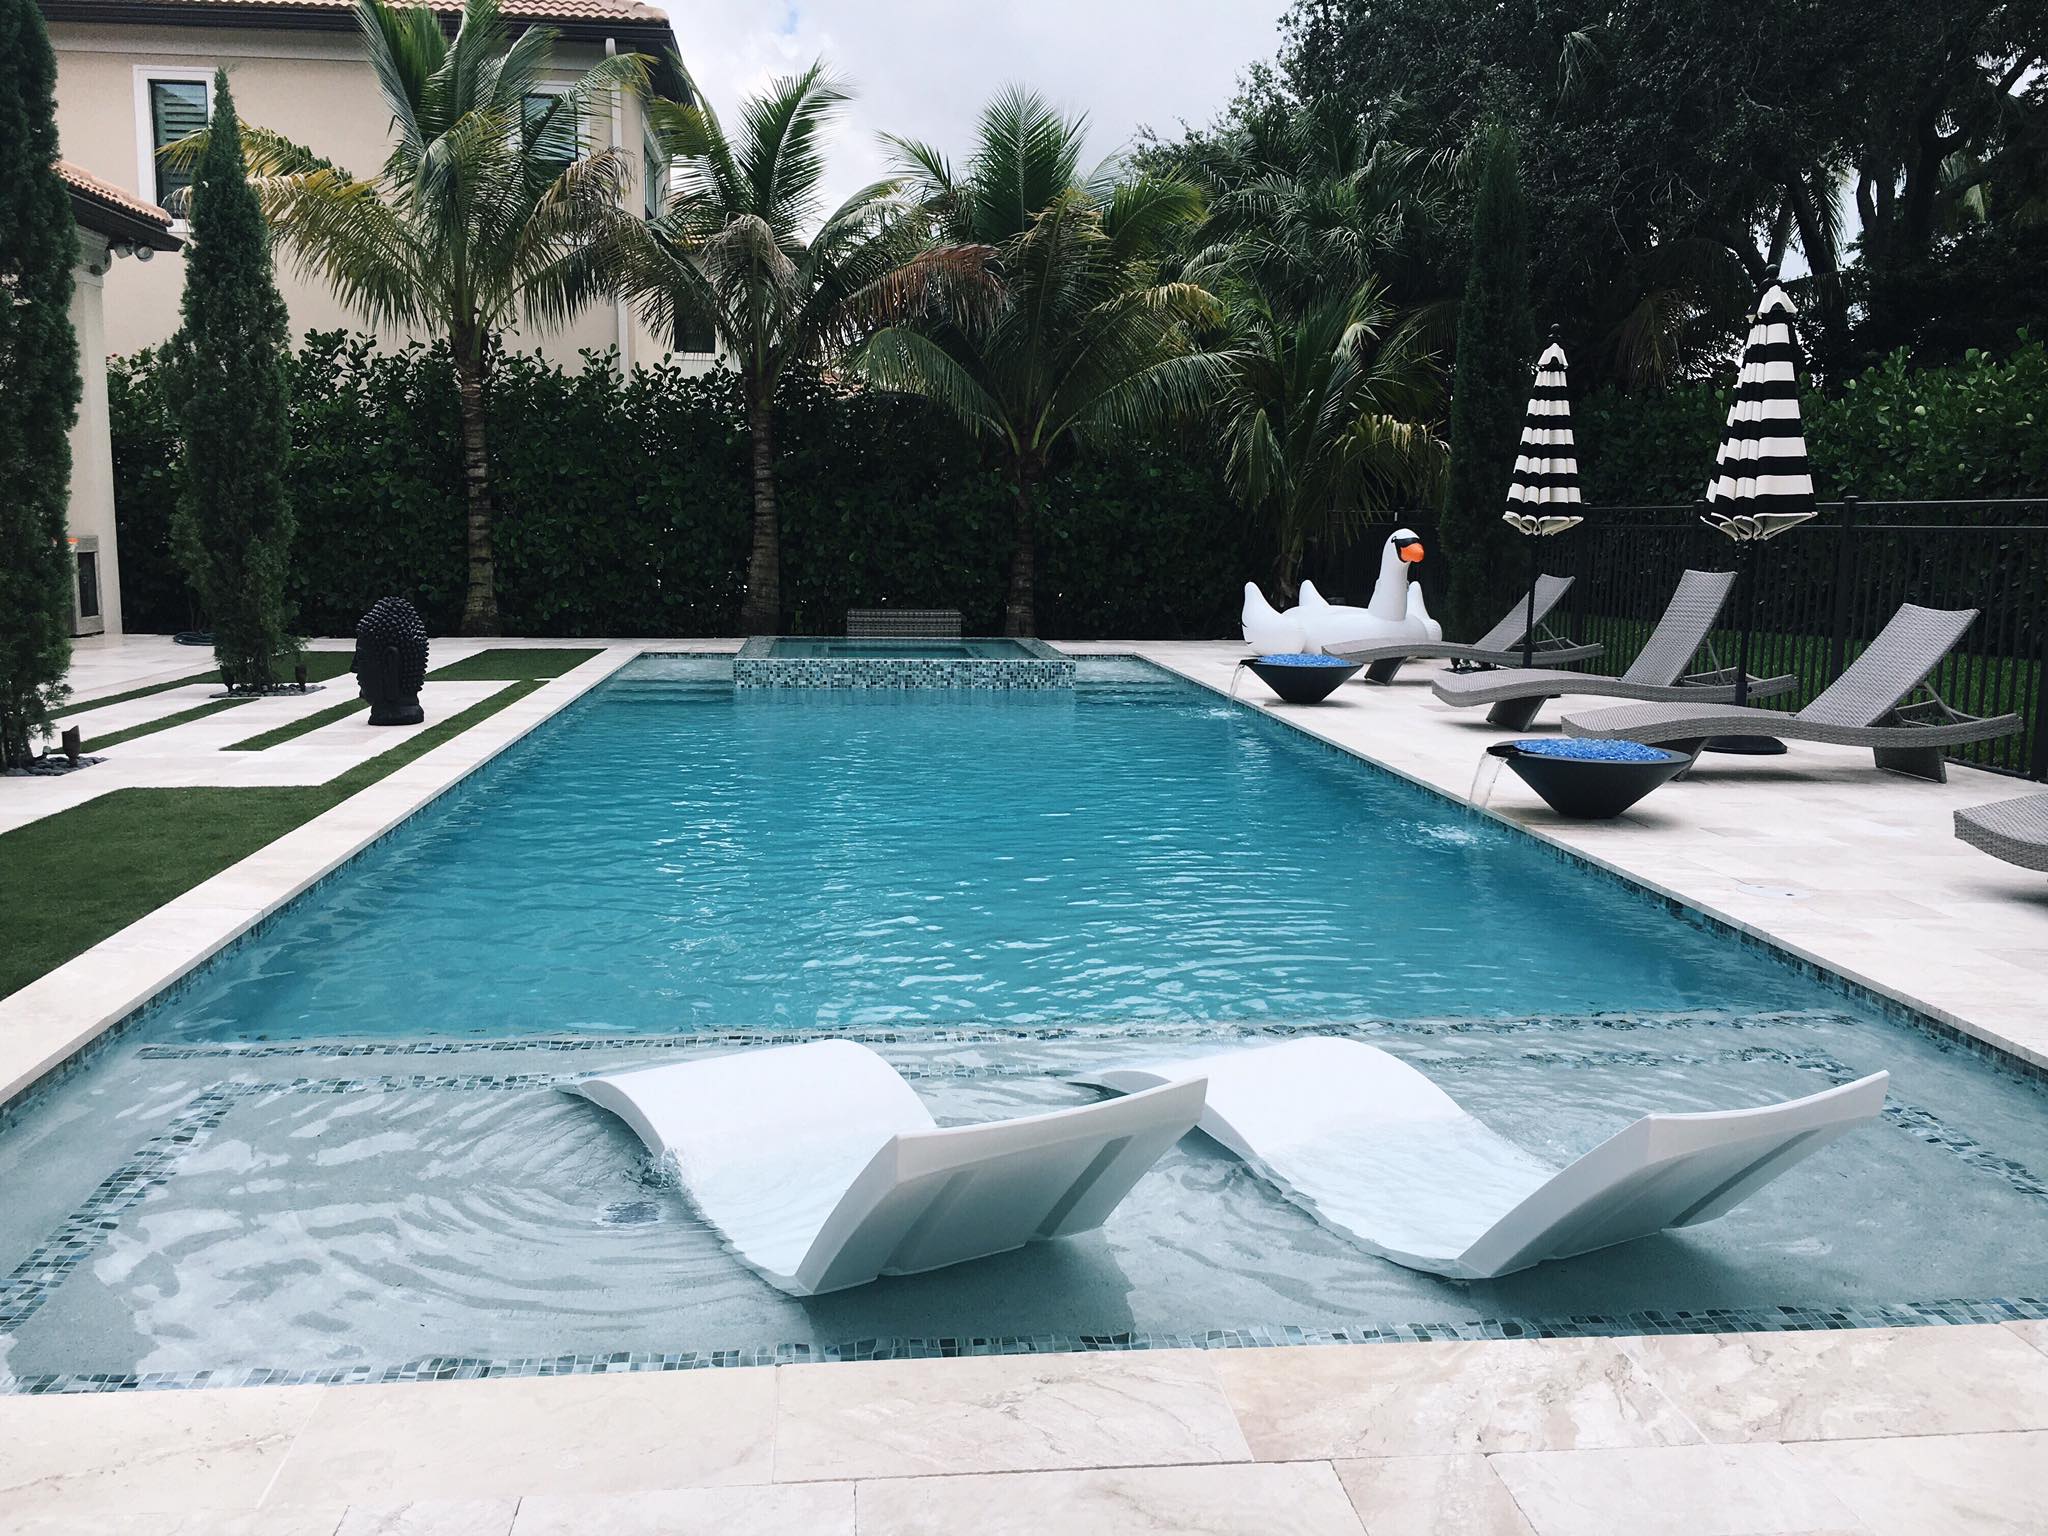 A pool view with some ledge lounger chairs